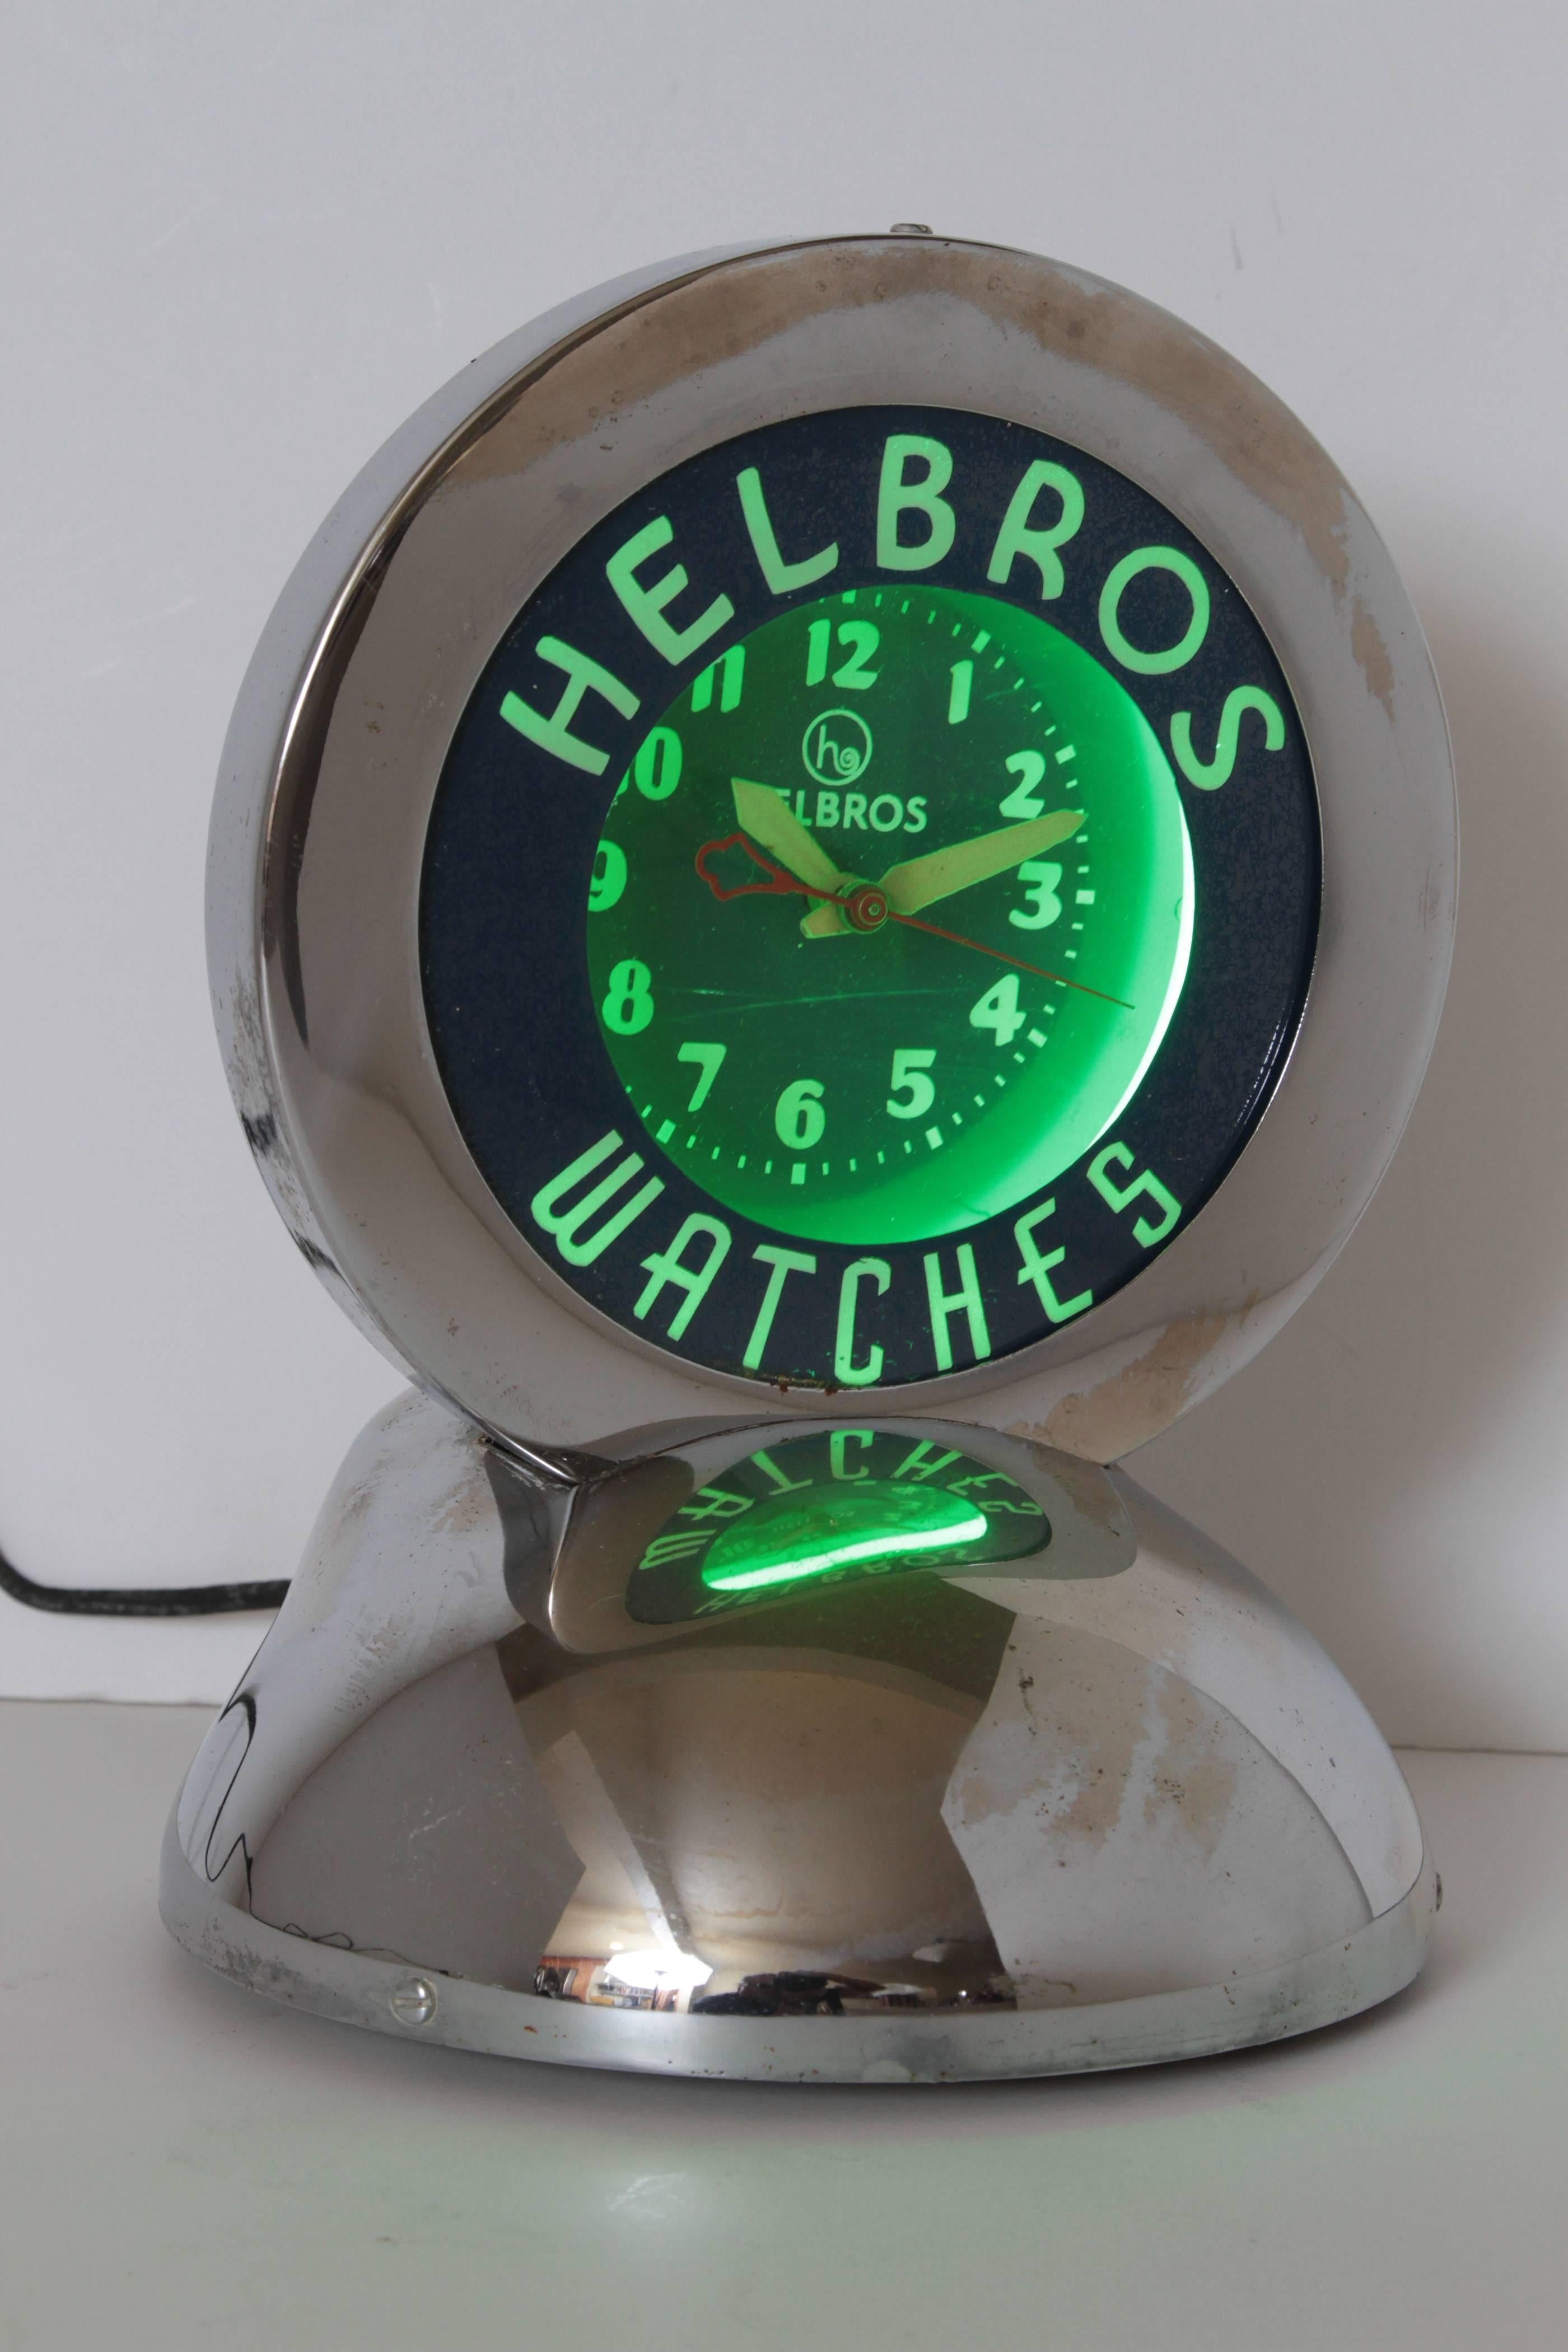 Machine Age Art Deco chrome and neon helbros advertising clock by Glo Dial

Rare original Helbros example, in working condition. 
All original; with Classic Glo Dial green neon, reverse painted glass, chromed case.
Self-contained tabletop